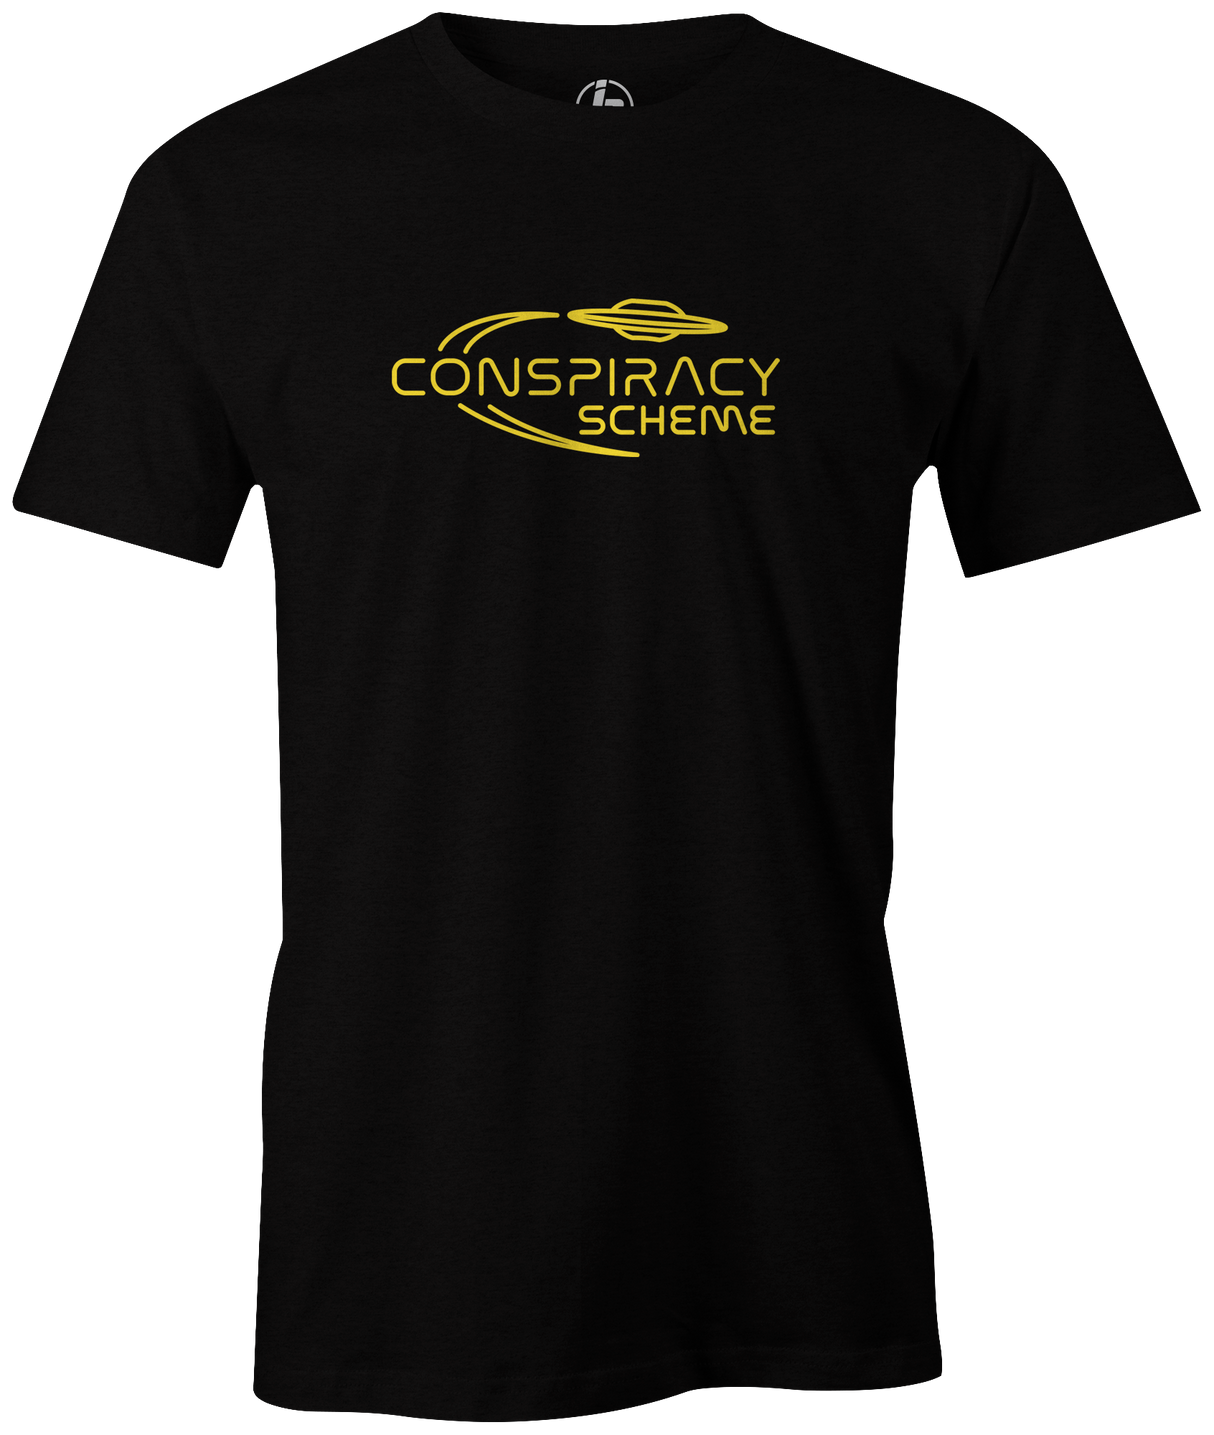 Check out this Radical Technologies Conspiracy Theory Scheme bowling league tee (t-shirt, tees, tshirt, teeshirt) available at Inside Bowling. Comfortable cheap discounted special bowling shirts for bowlers online. Get what you can't get on Amazon, Walmart, Target, or E-Bay here. Men's T-Shirt, Purple, bowling, bowling ball, tee, tee shirt, tee-shirt, t shirt, t-shirt, tees, league bowling team shirt, tournament shirt, funny, cool, awesome, brunswick, brand